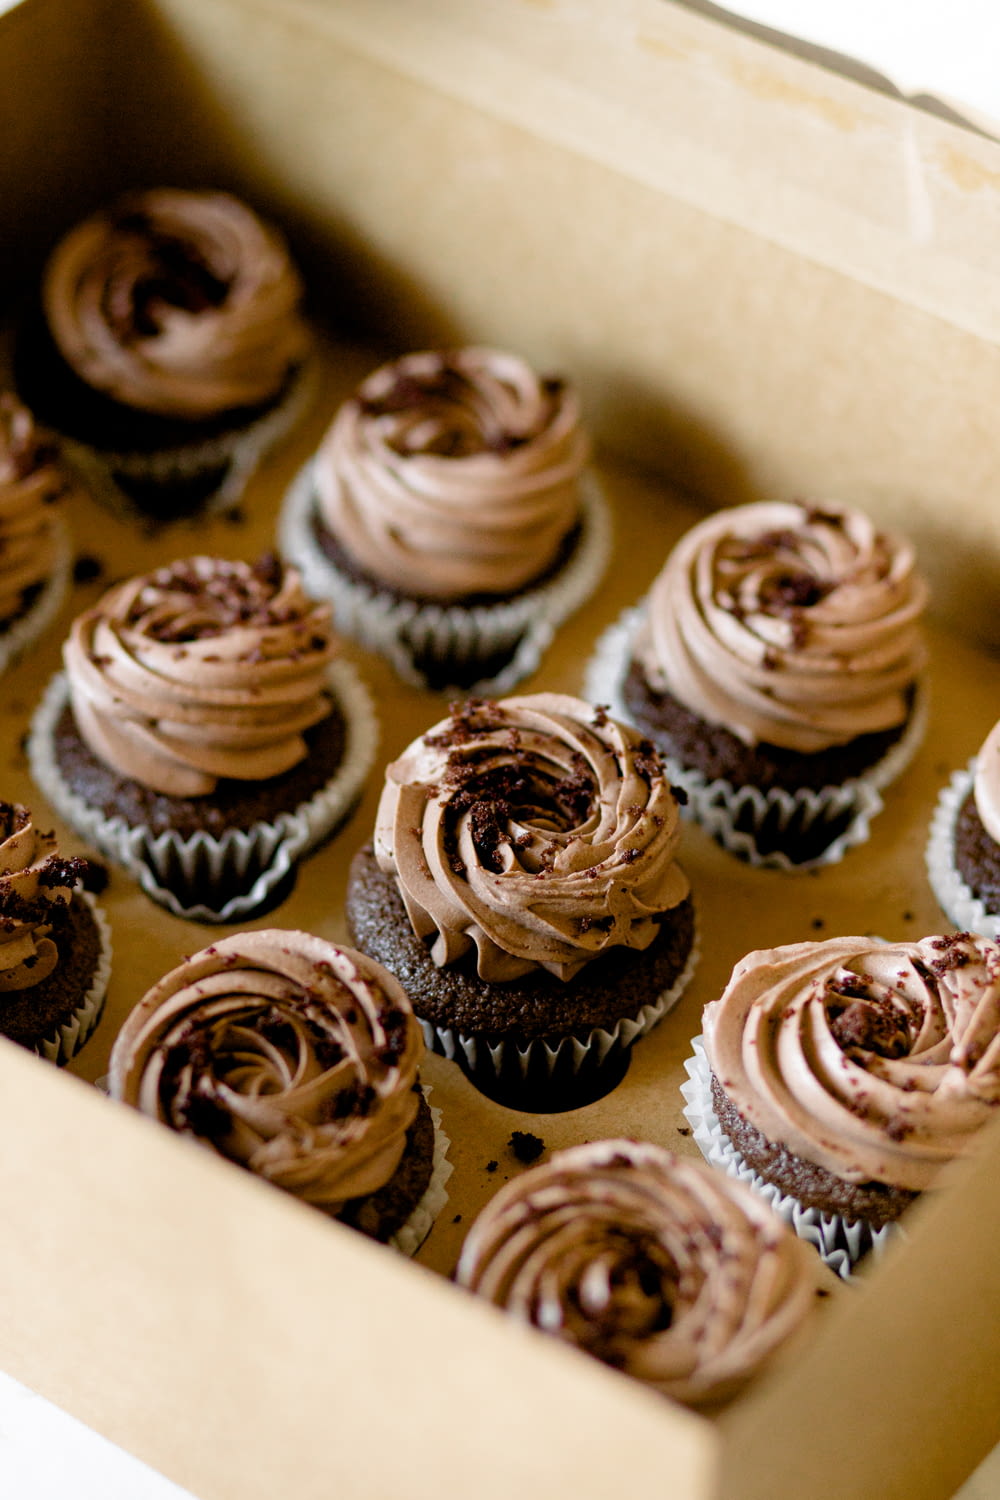 a box full of chocolate cupcakes with frosting